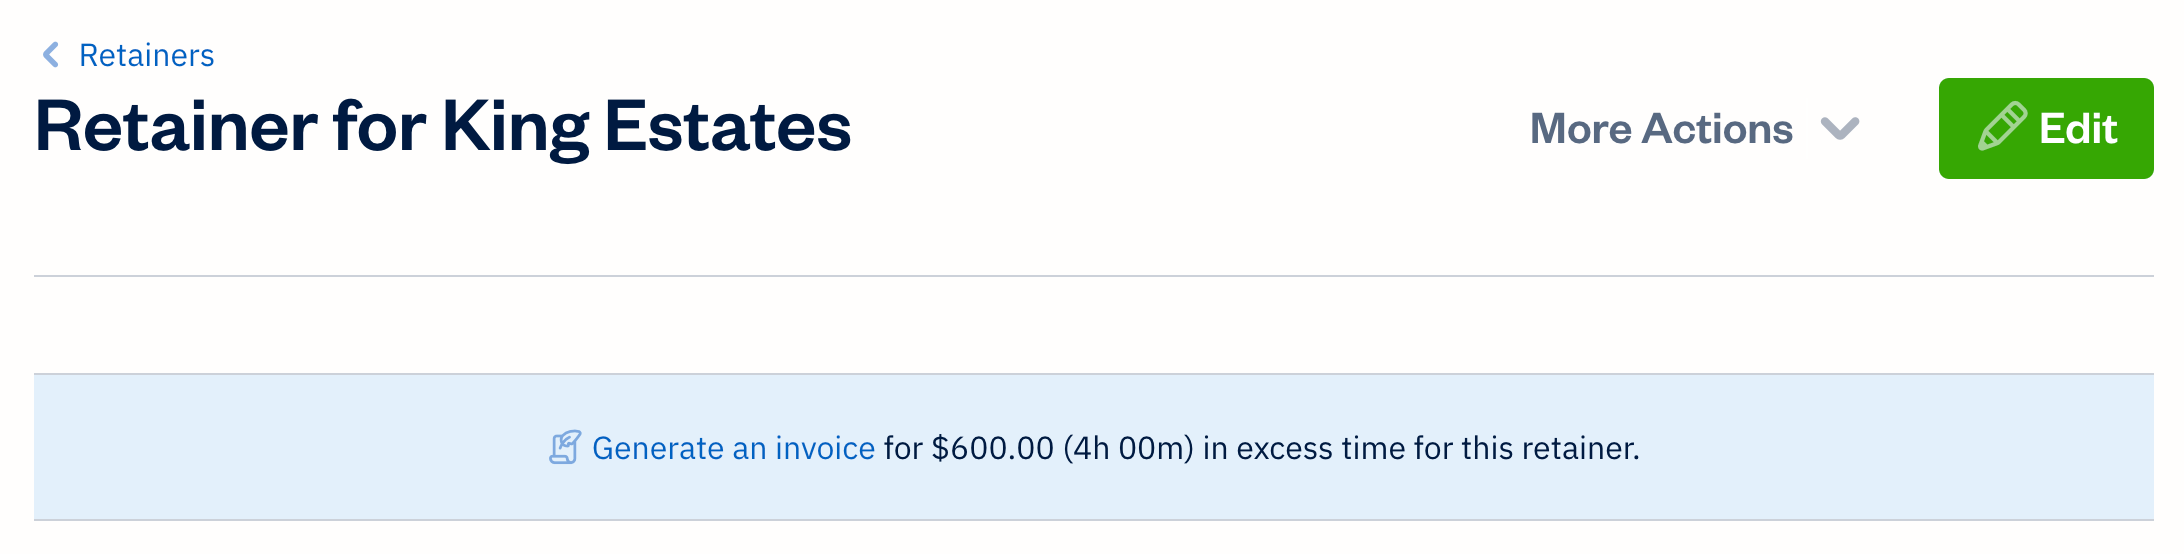 Link to generate an invoice for excess time.